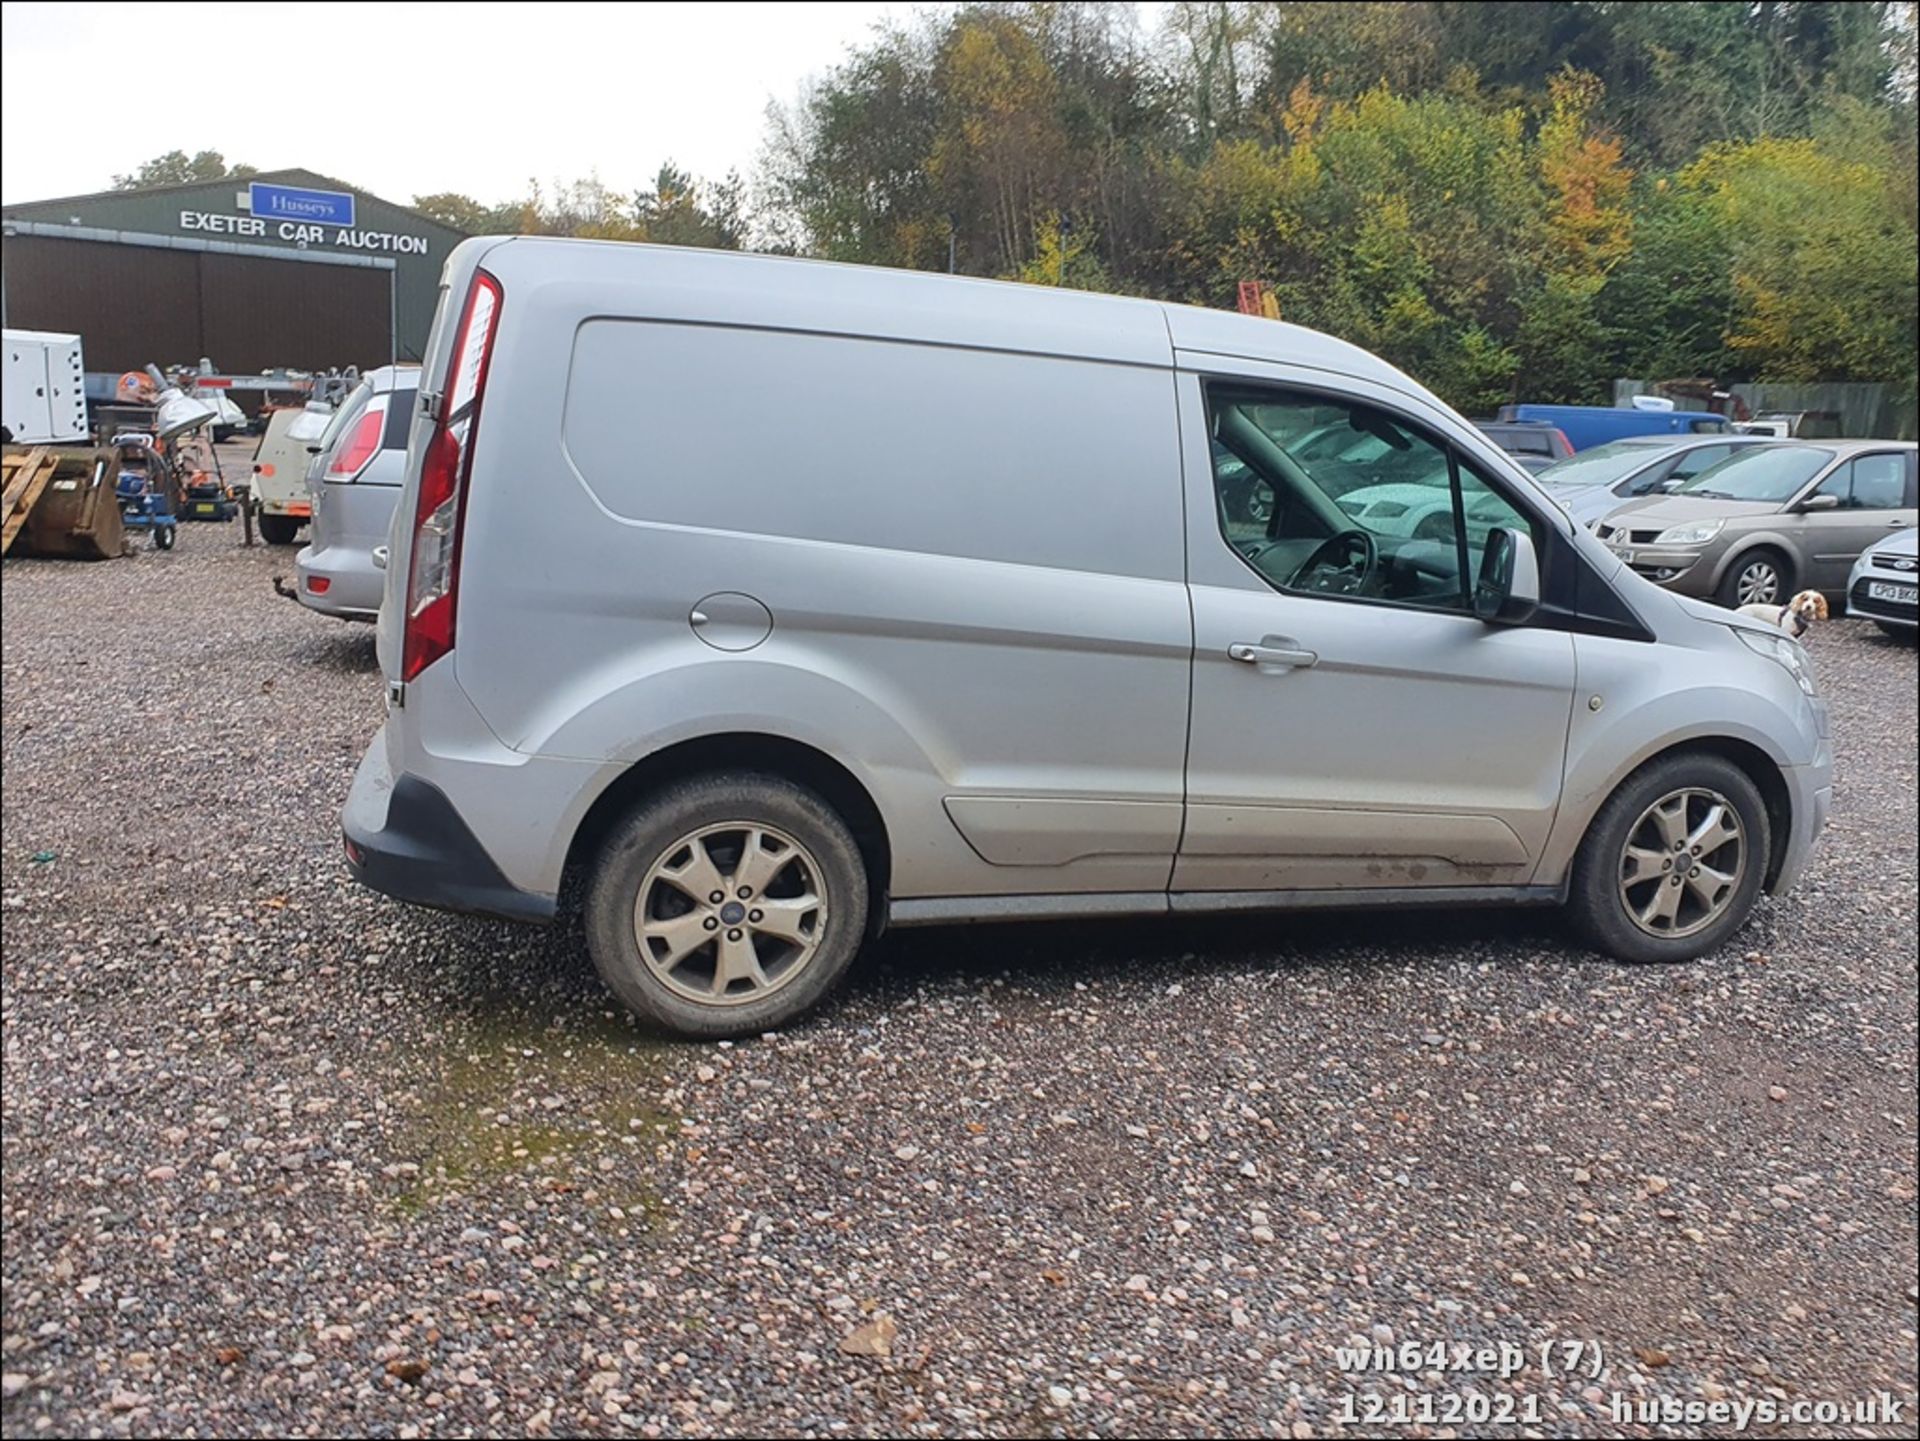 14/64 FORD TRANSIT CONNECT 200 LIMIT - 1560cc 5dr Van (Silver, 82k) - Image 7 of 27